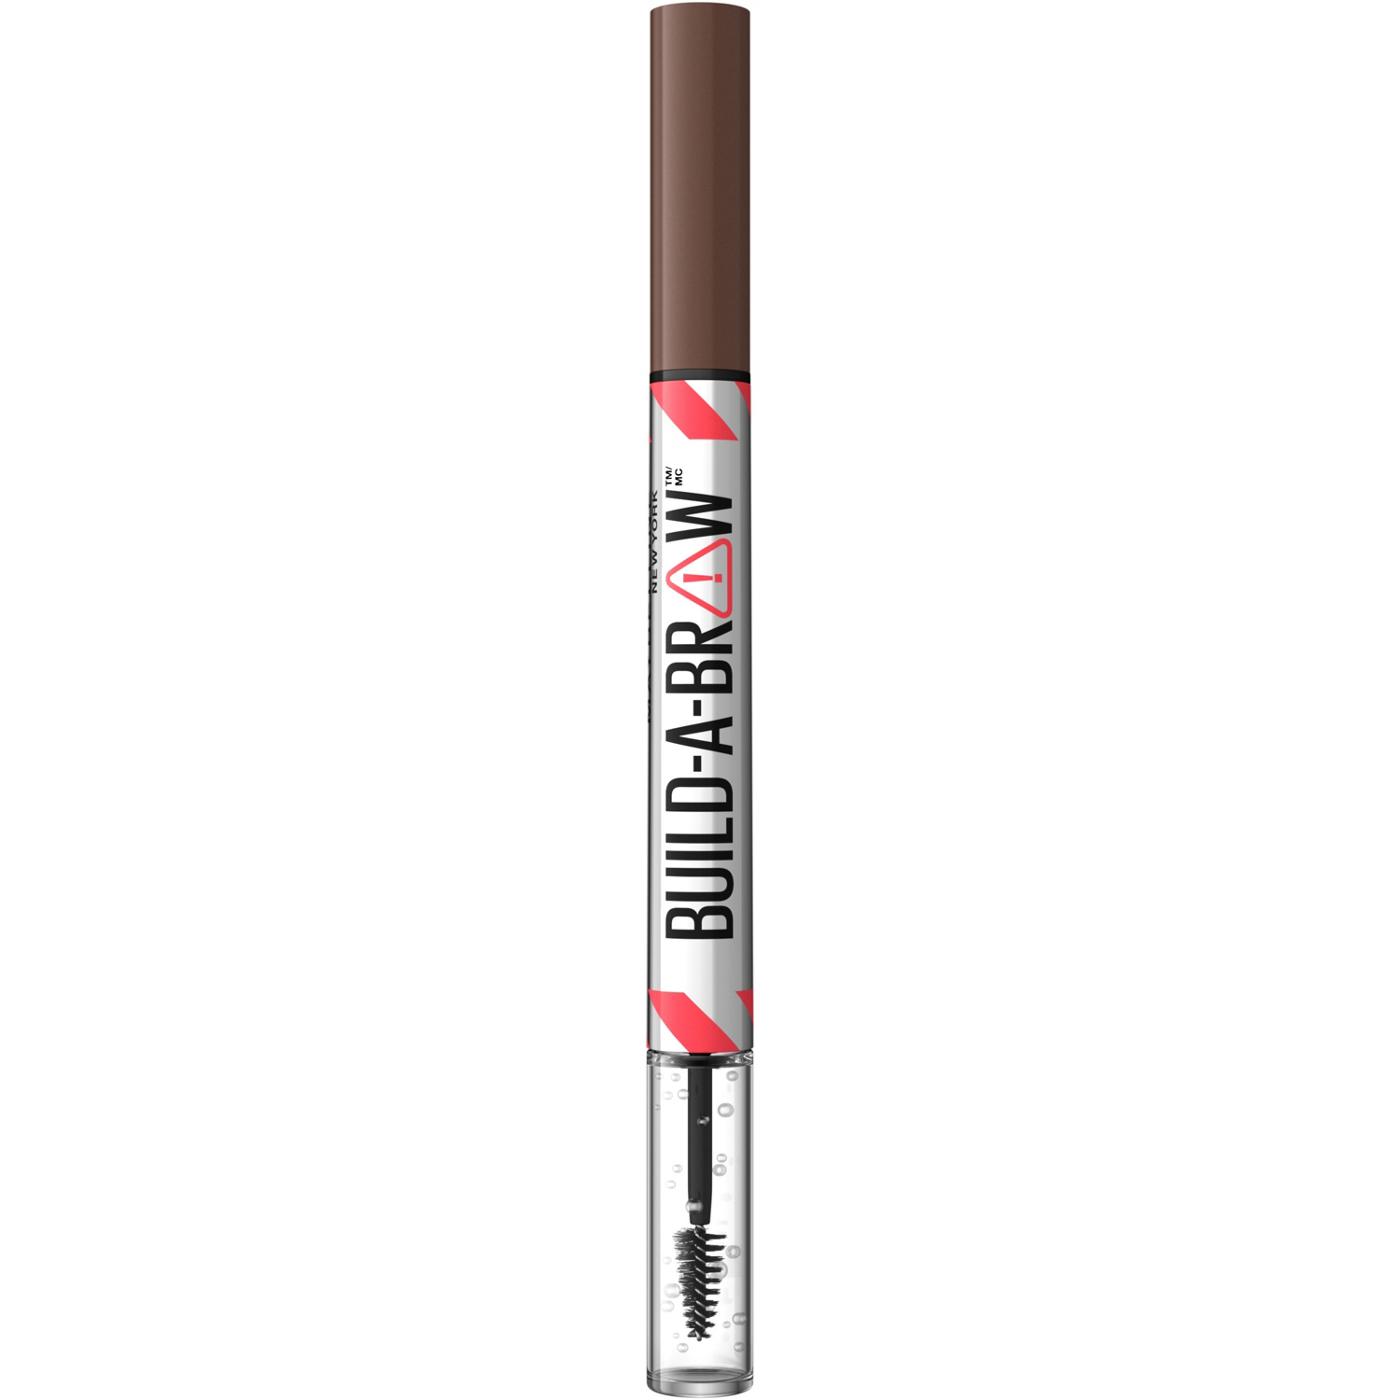 Maybelline Build A Brow 2 In 1 Brow Pen - Medium Brown; image 13 of 16